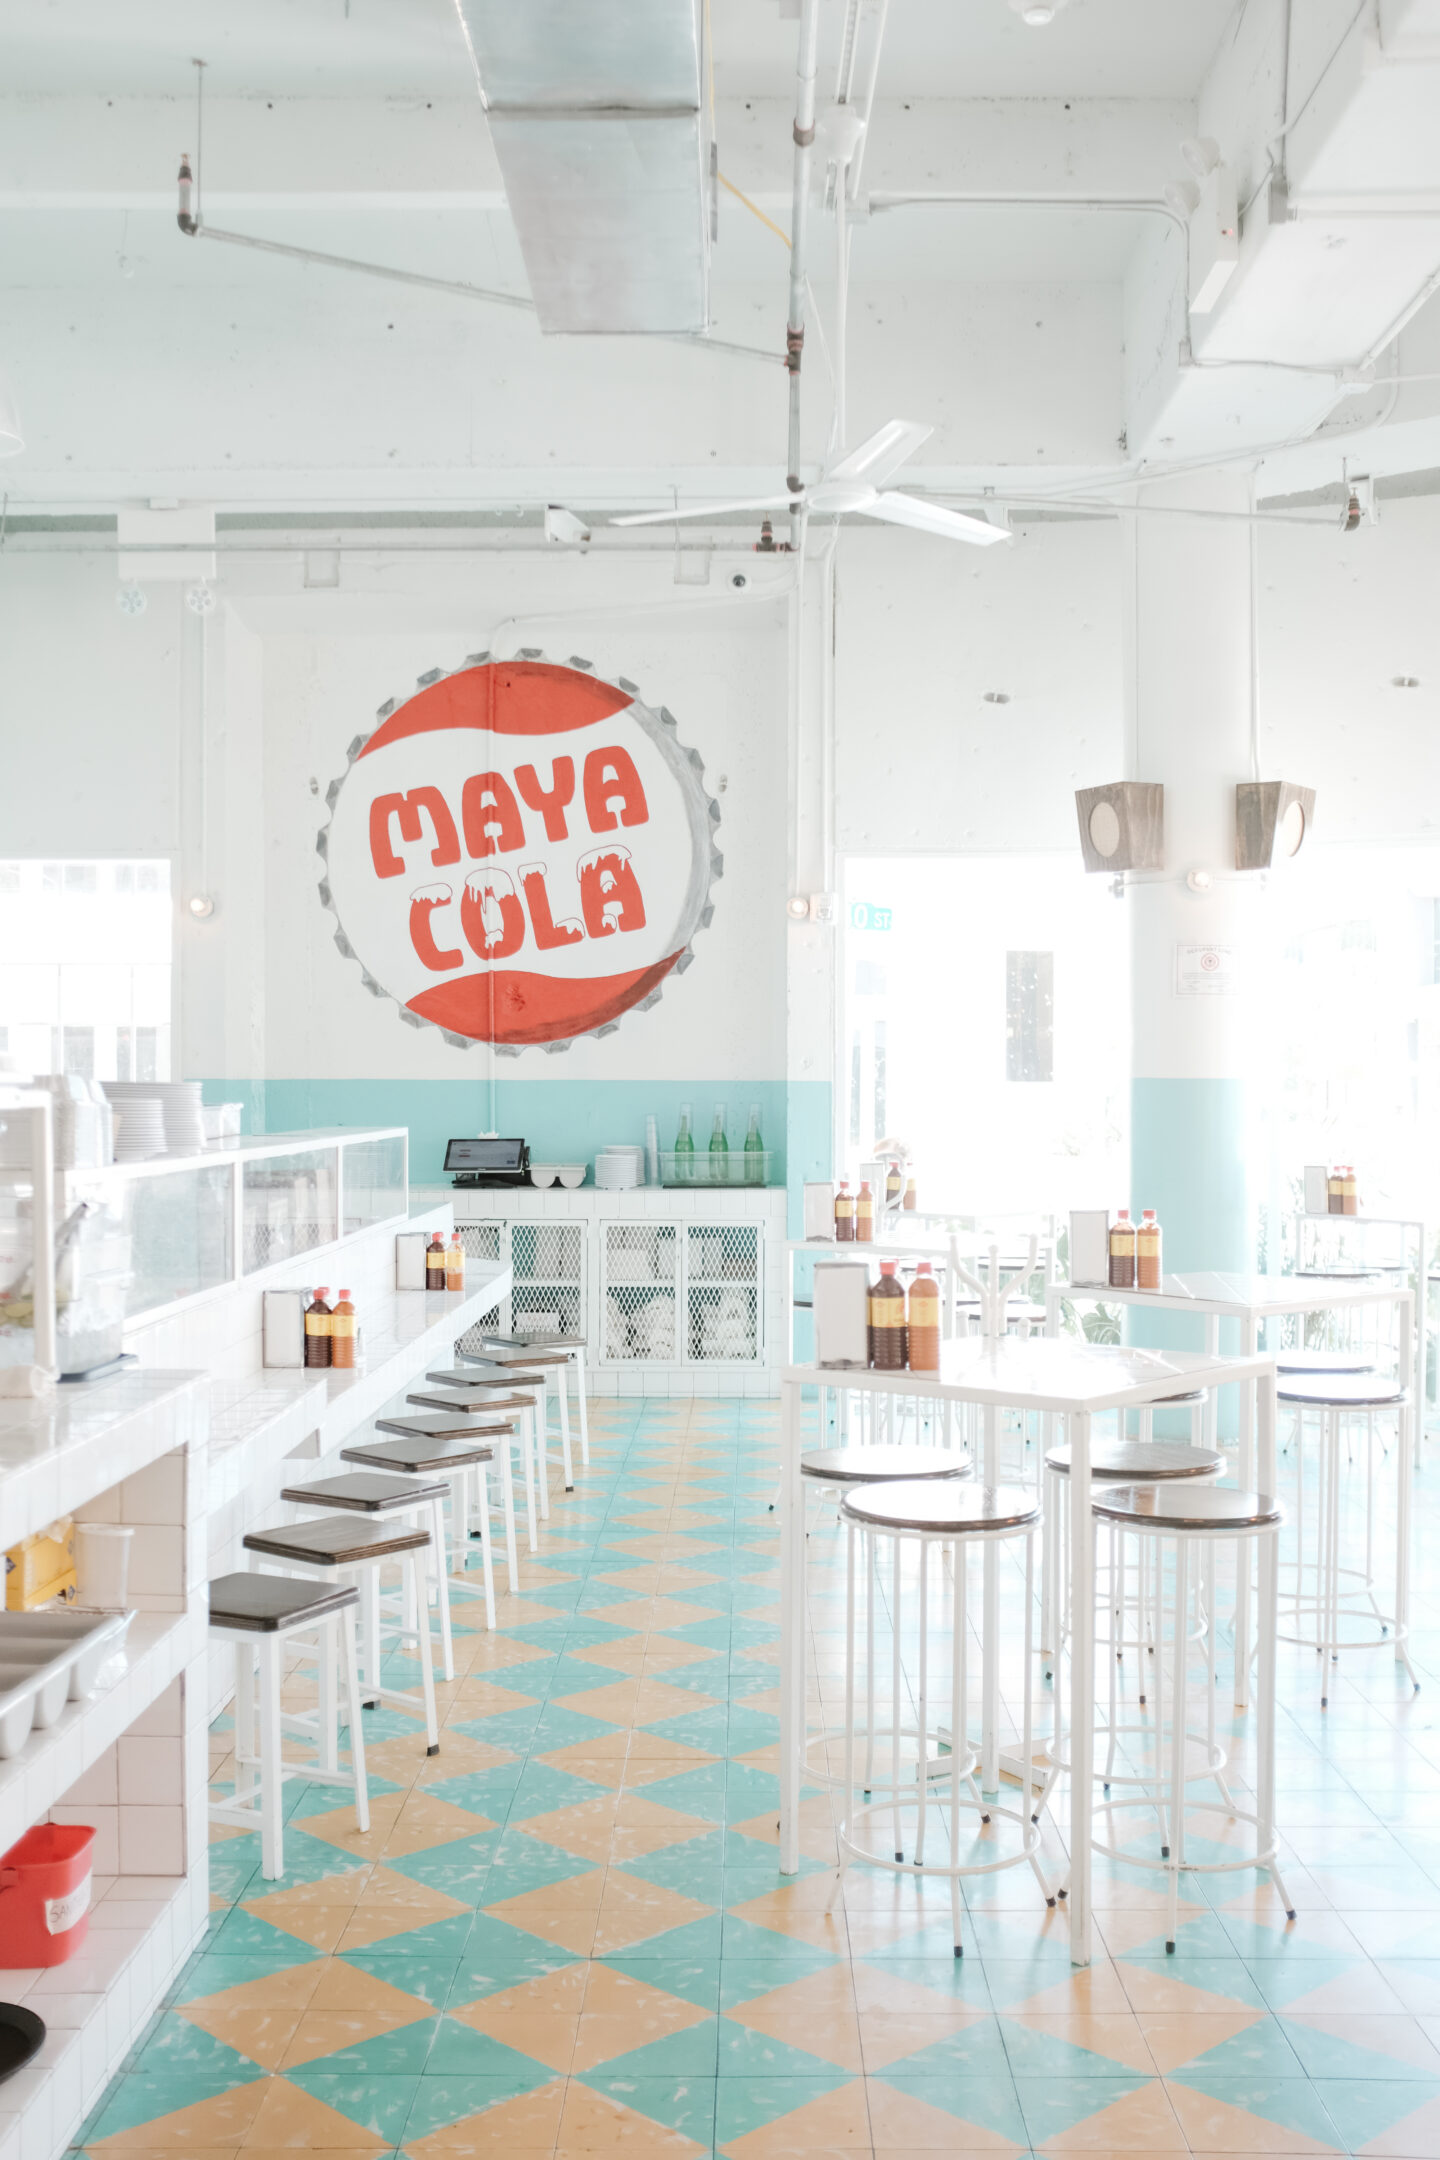 Check This Miami Travel Guide If You're a Design Lover (and a Real Foodie)